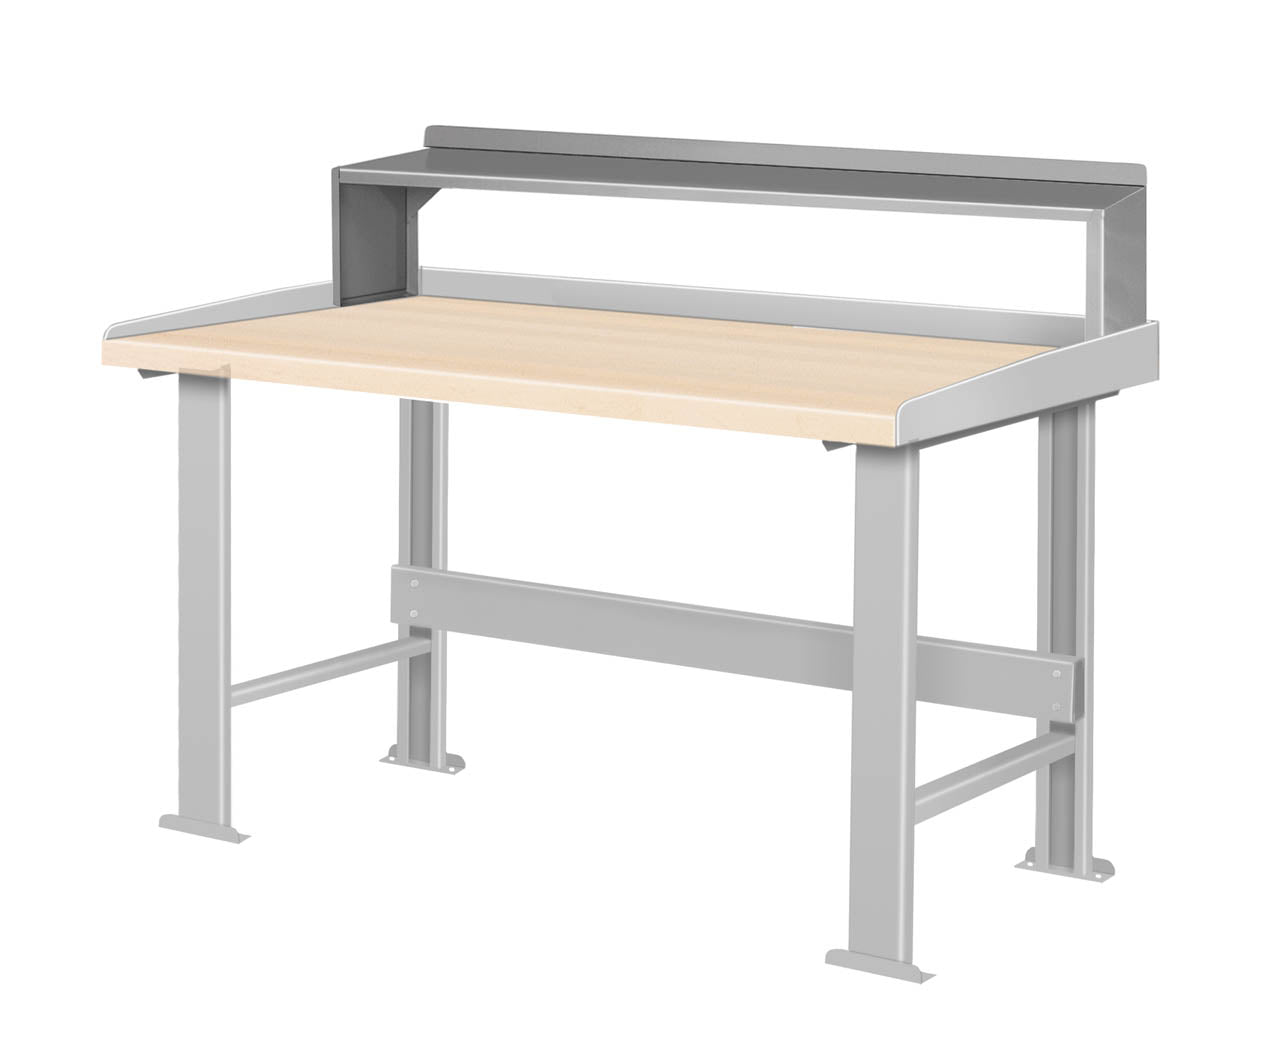 96"W Bench Riser for Pucel Work Benches